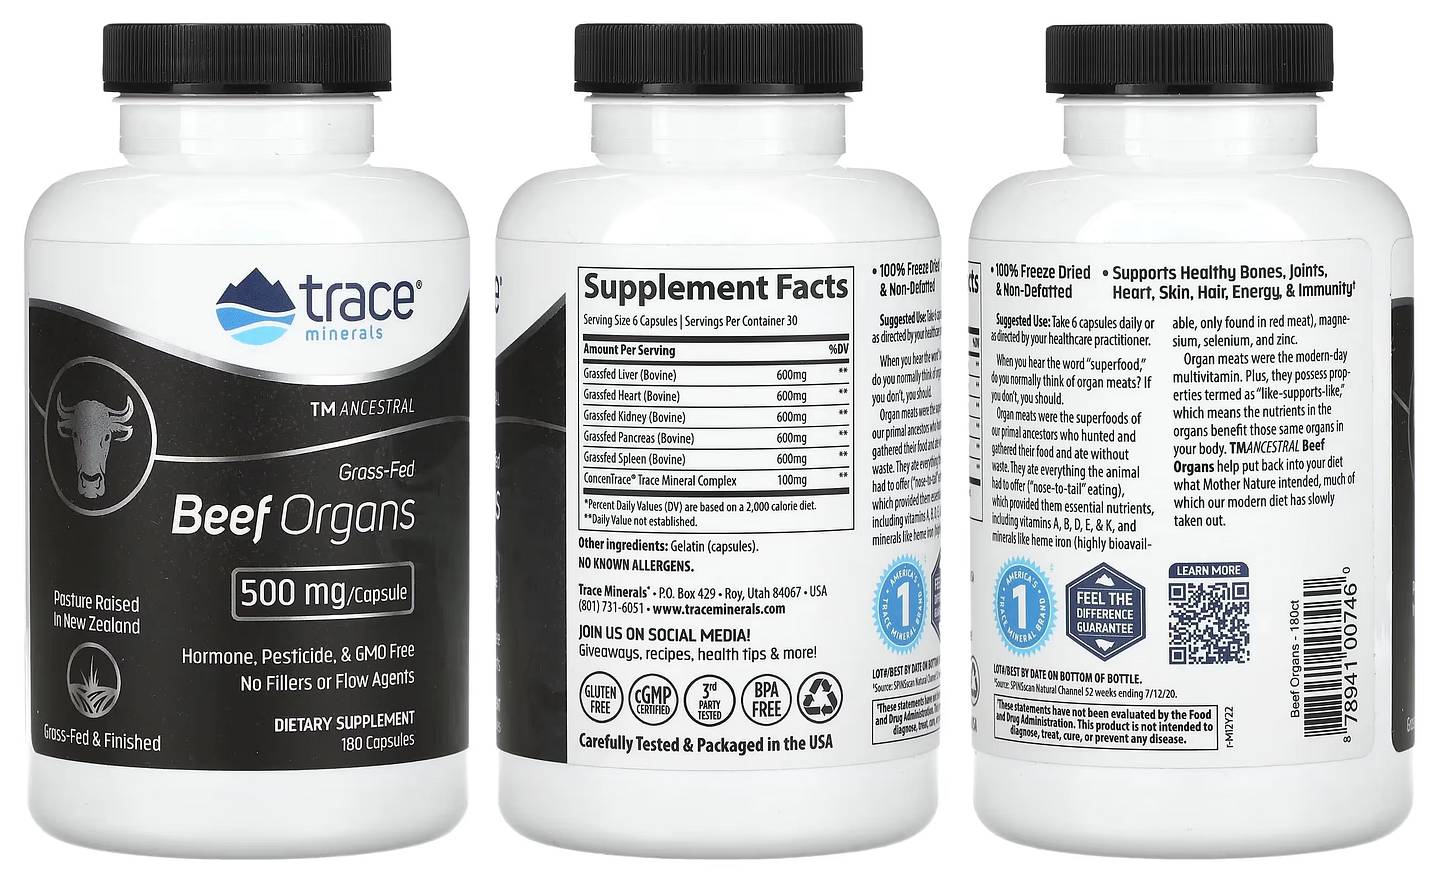 Trace Minerals, TM Ancestral, Grass-Fed Beef Organs packaging